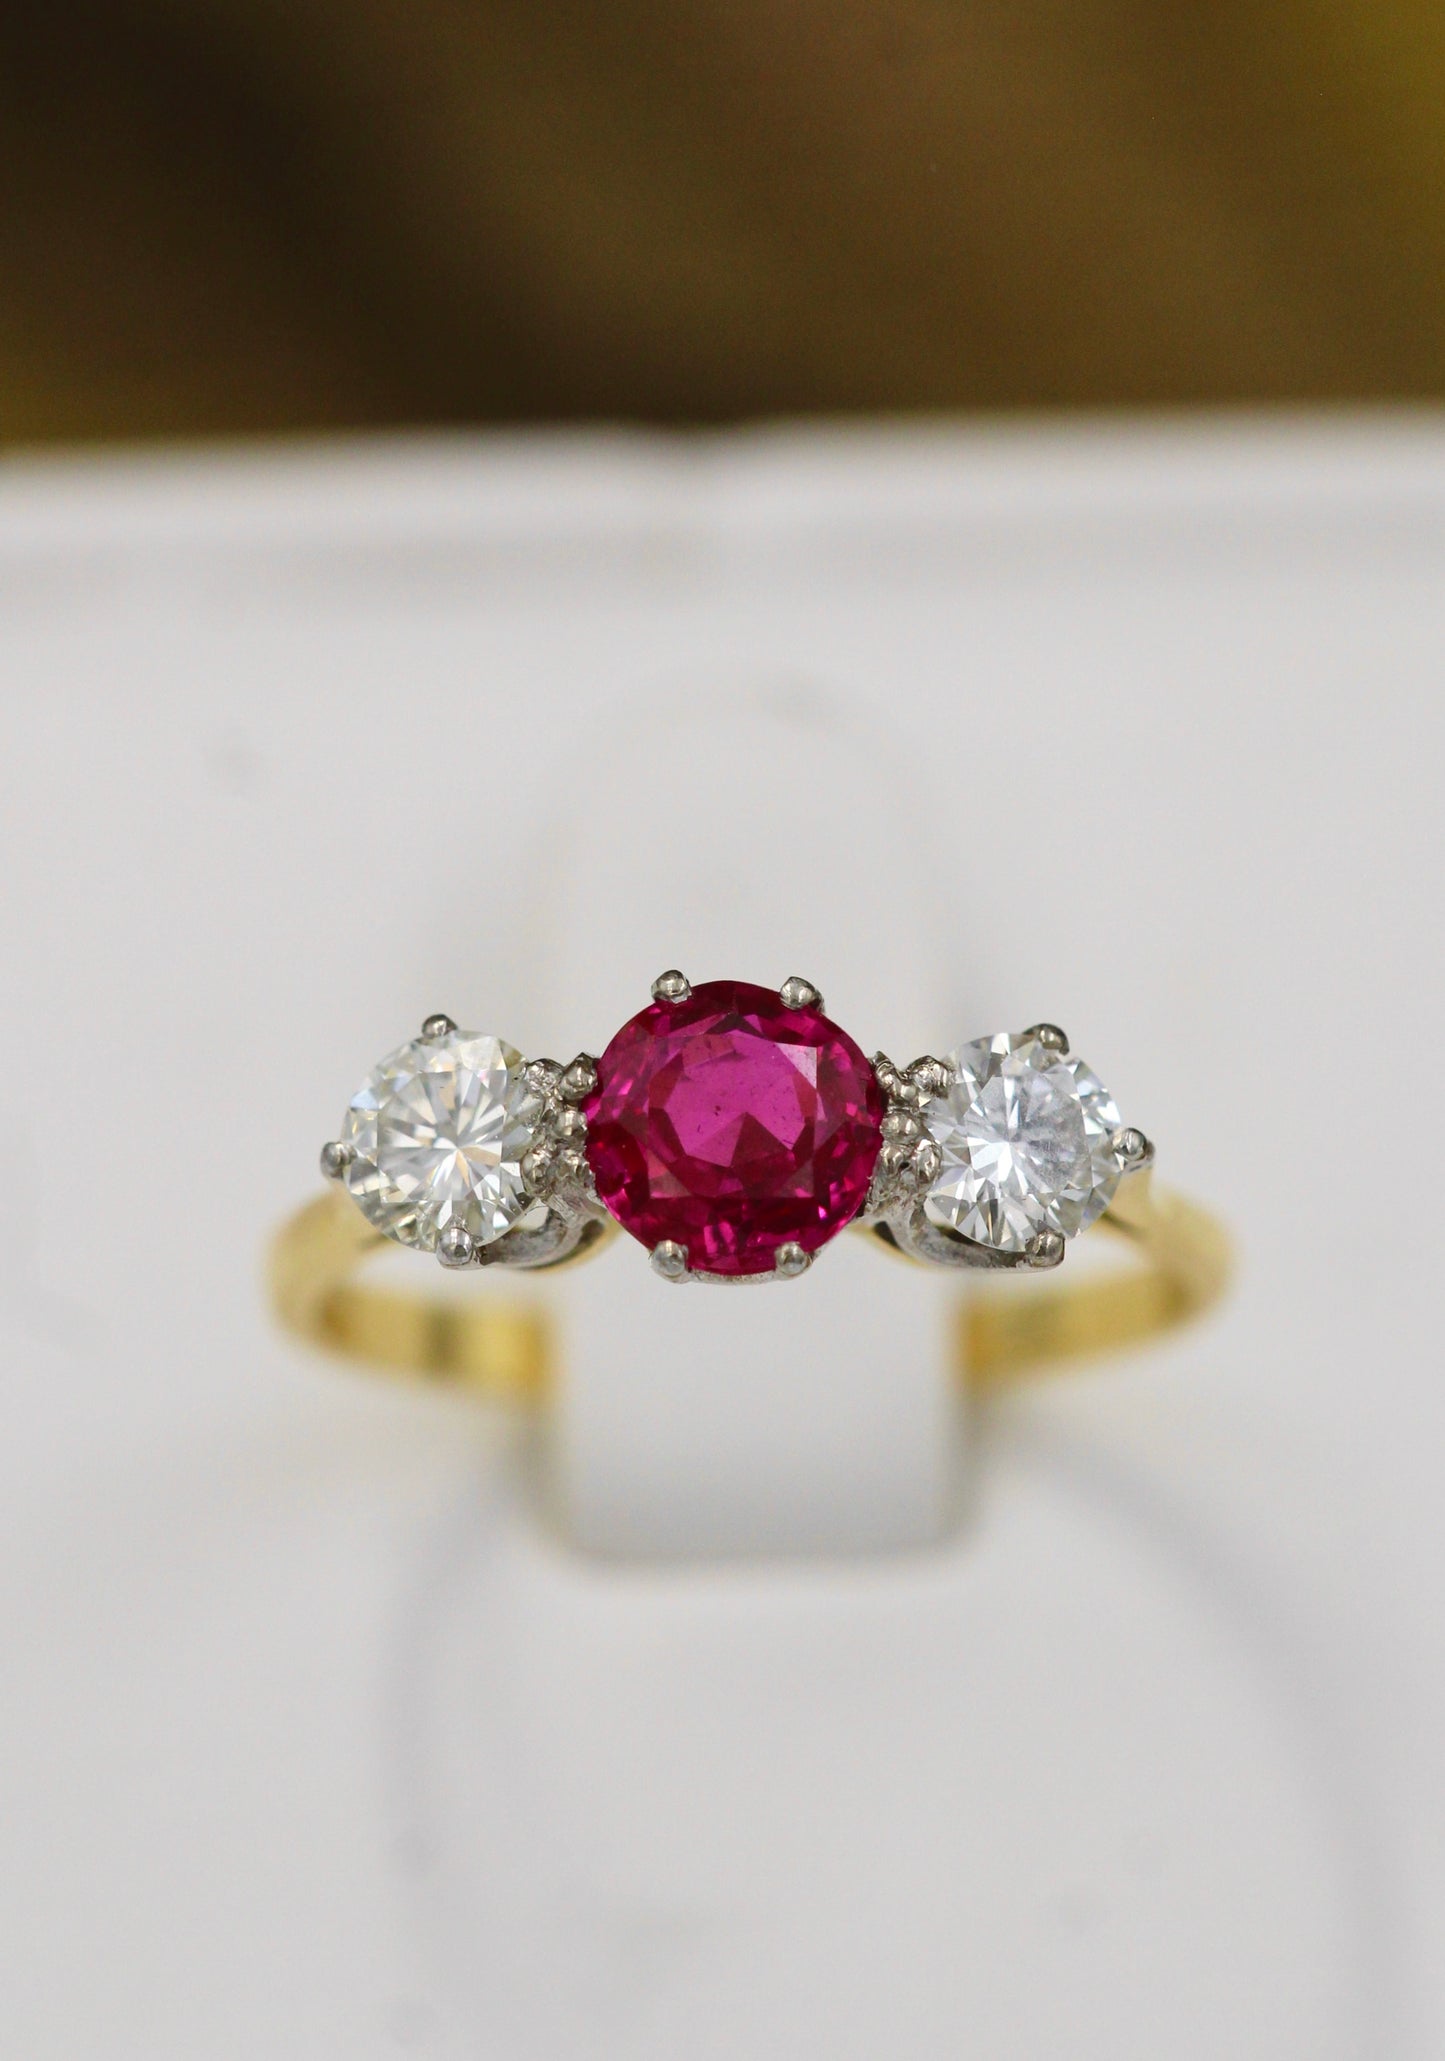 A very fine Ruby and Diamond Three Stone Ring in 18 carat Yellow Gold. - Robin Haydock Antiques